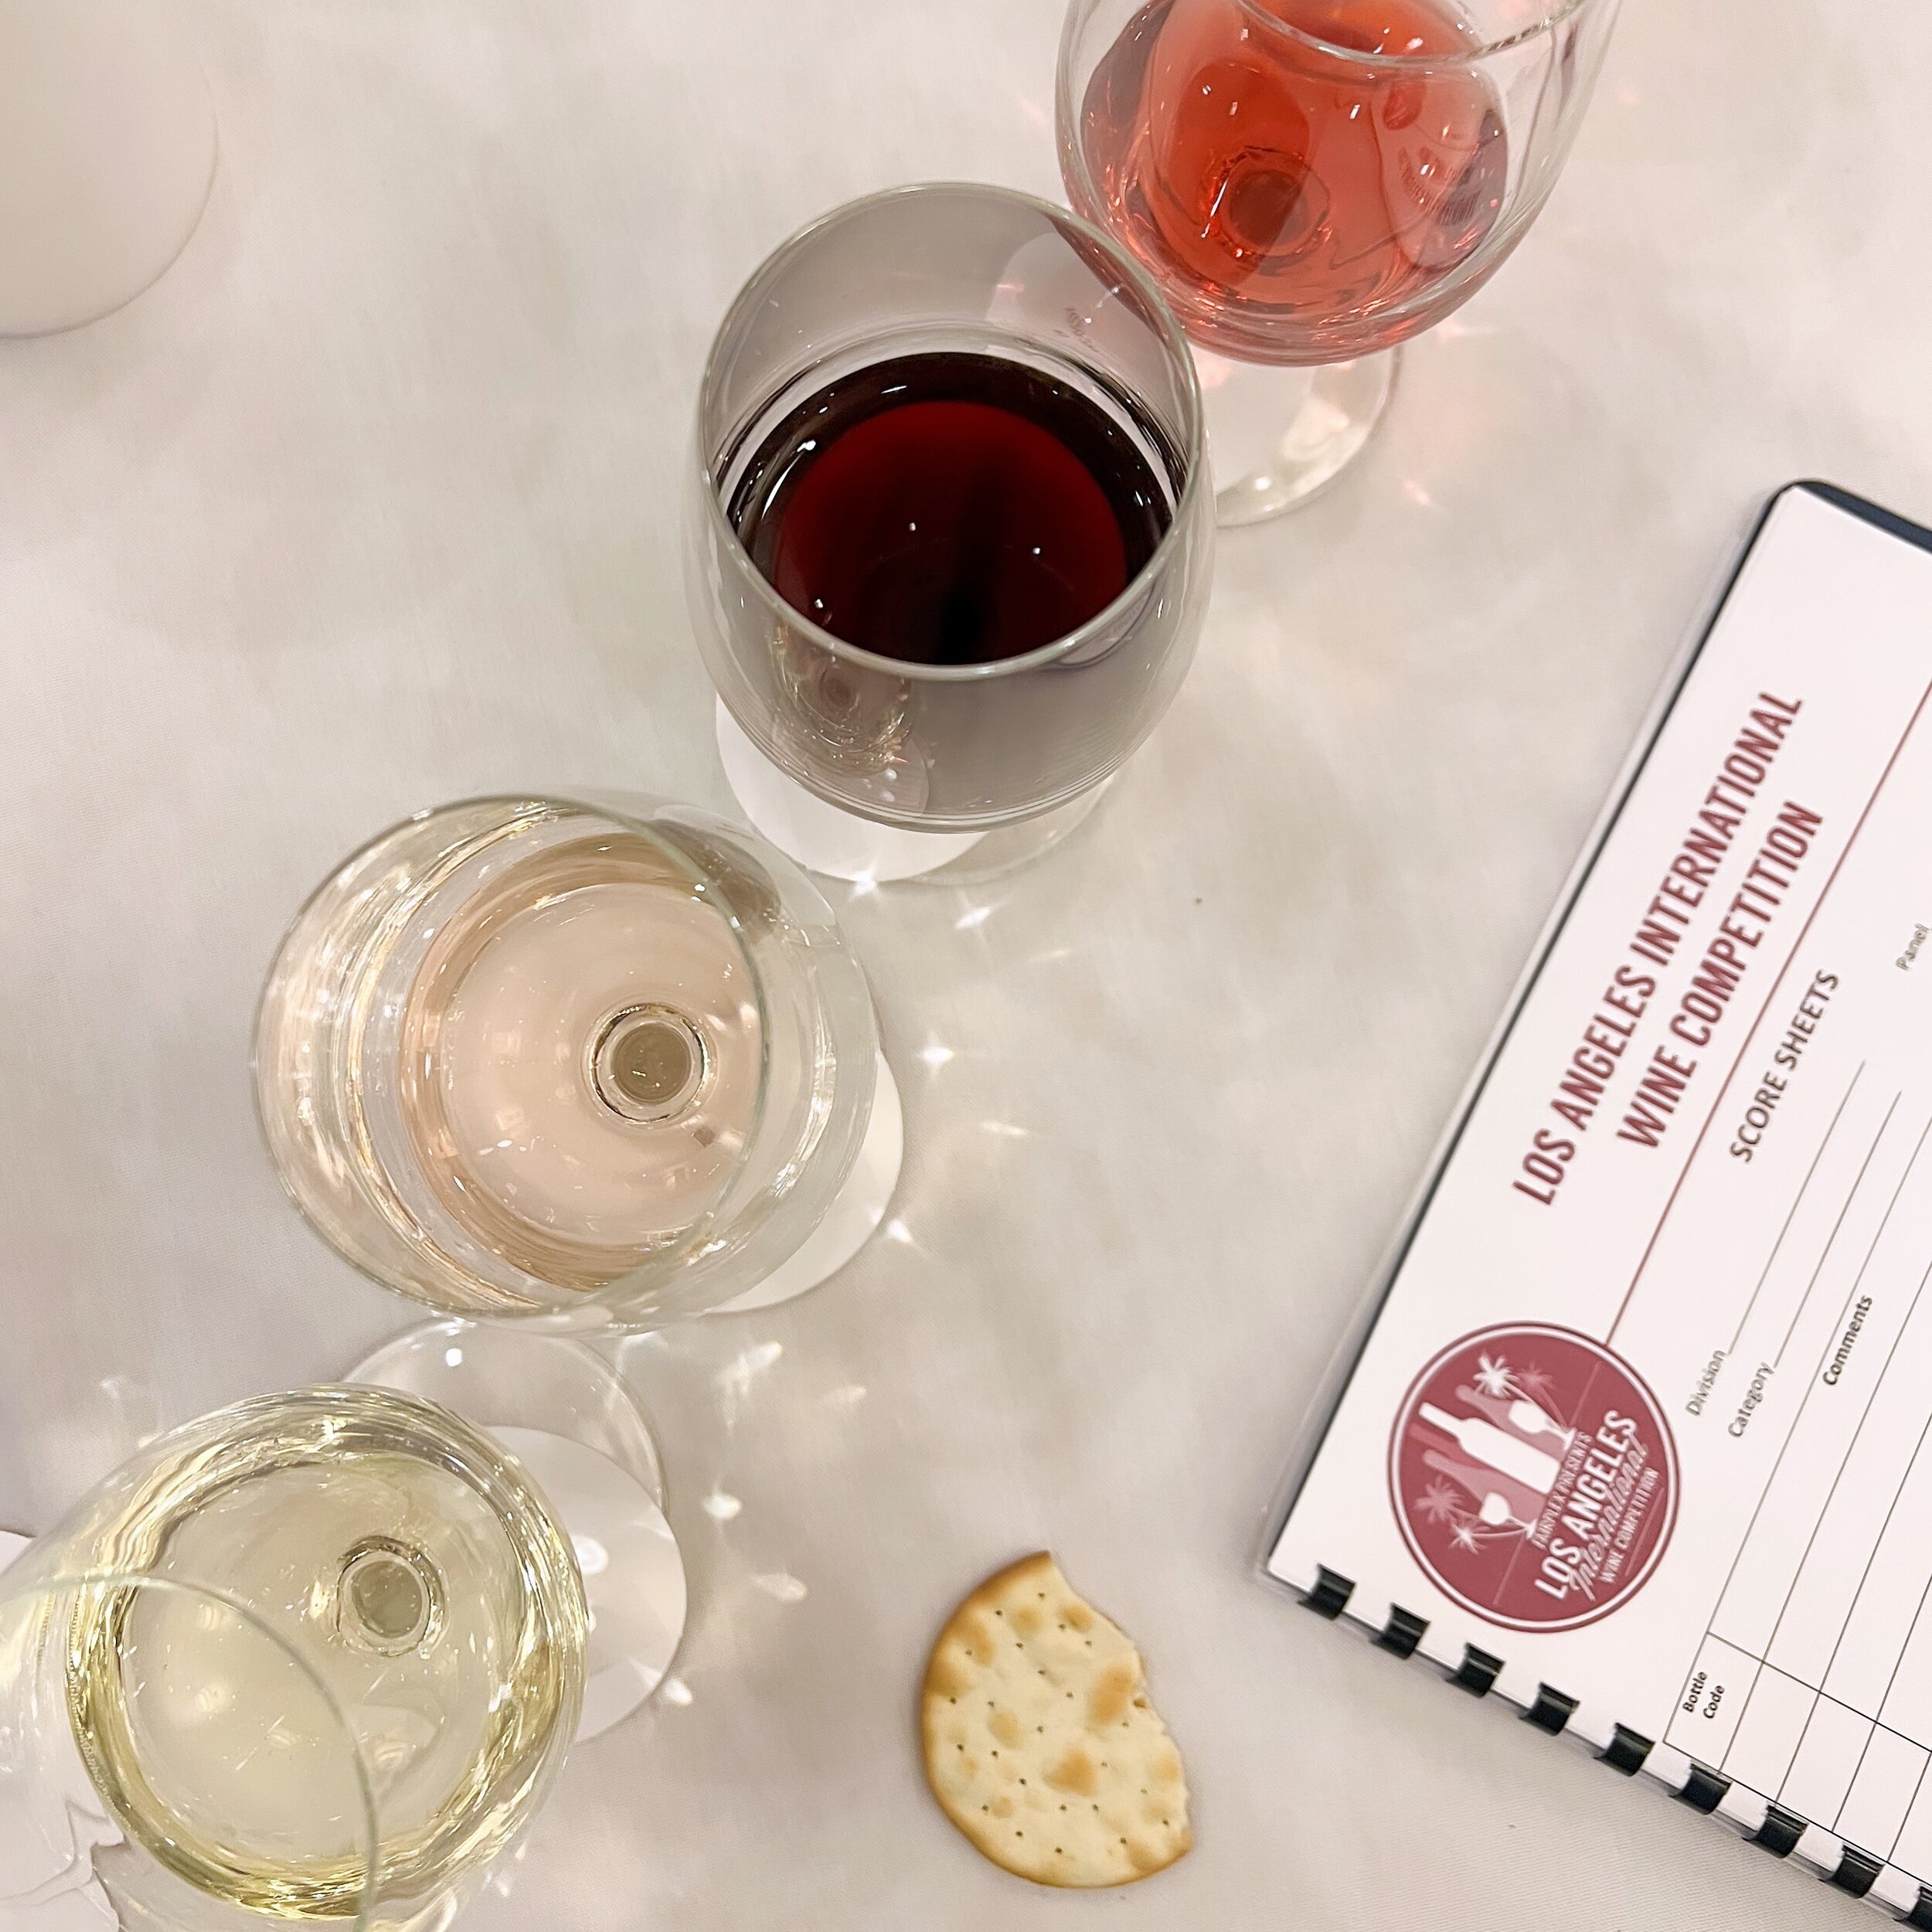 Excited to be returning to judge at the LA International Wine Competition this year! If you&rsquo;re a winery thinking about entering, the deadline has been extended to March 7th. Enter your wines so I can drink them&hellip;I mean judge them!